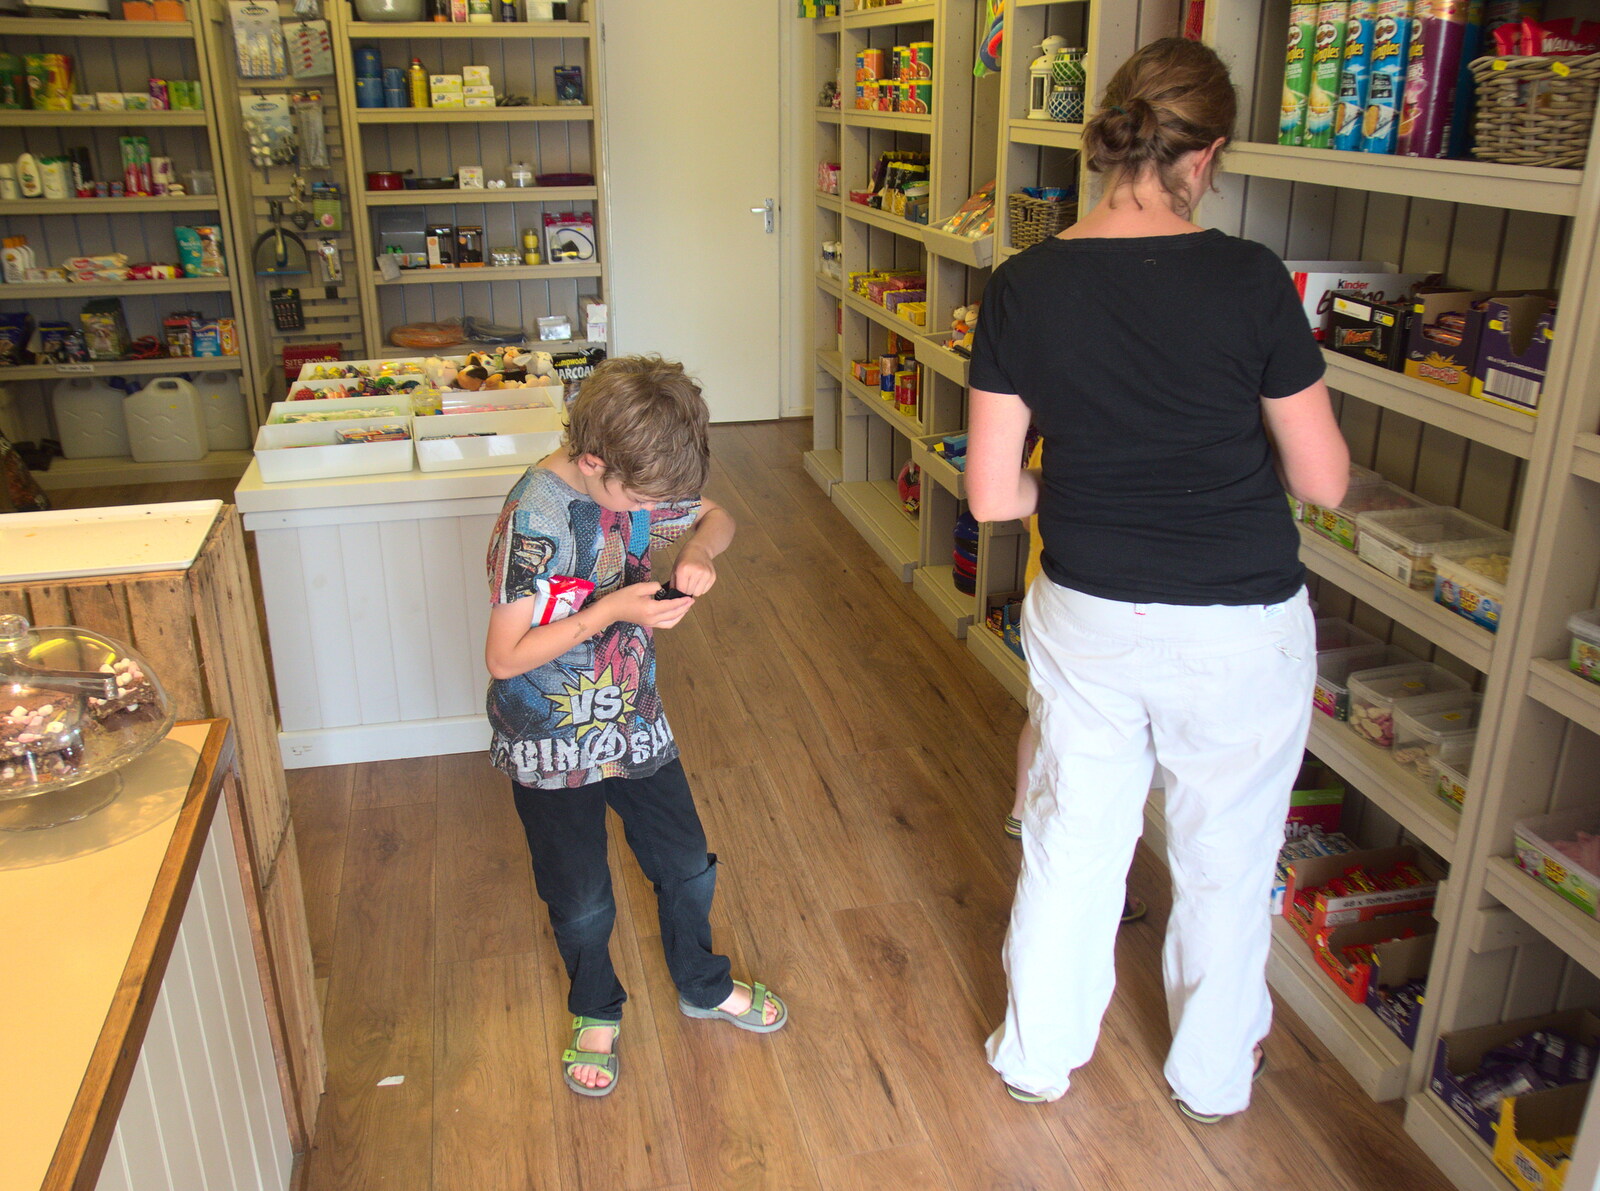 Fred checks for extra money to buy sweets with from Camping at Dower House, West Harling, Norfolk - 1st July 2017